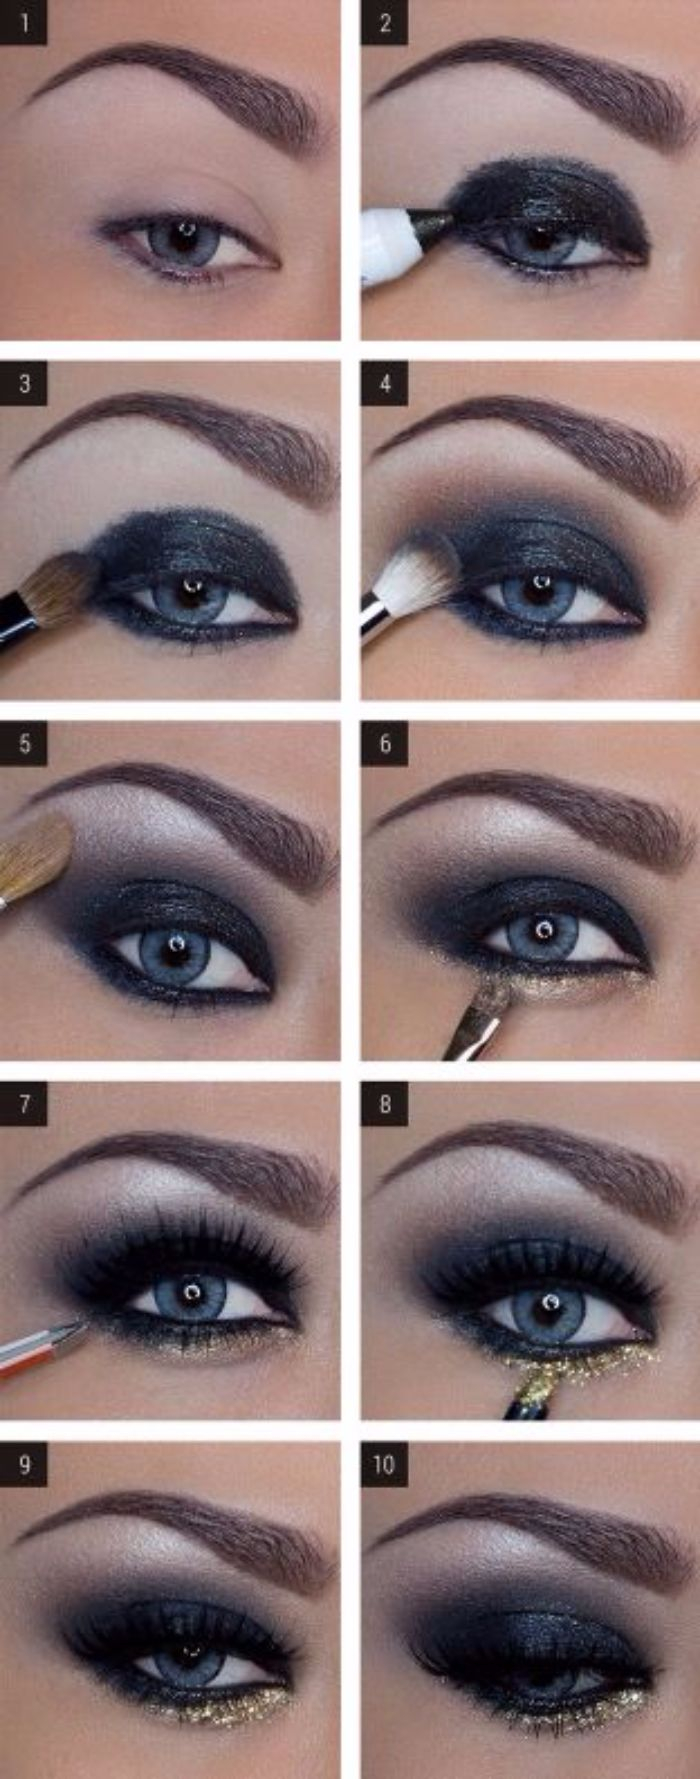 Gold Makeup For Blue Eyes 10 Eyeshadow For Blue Eyes Tutorials You Cannot Miss Beauty Essential